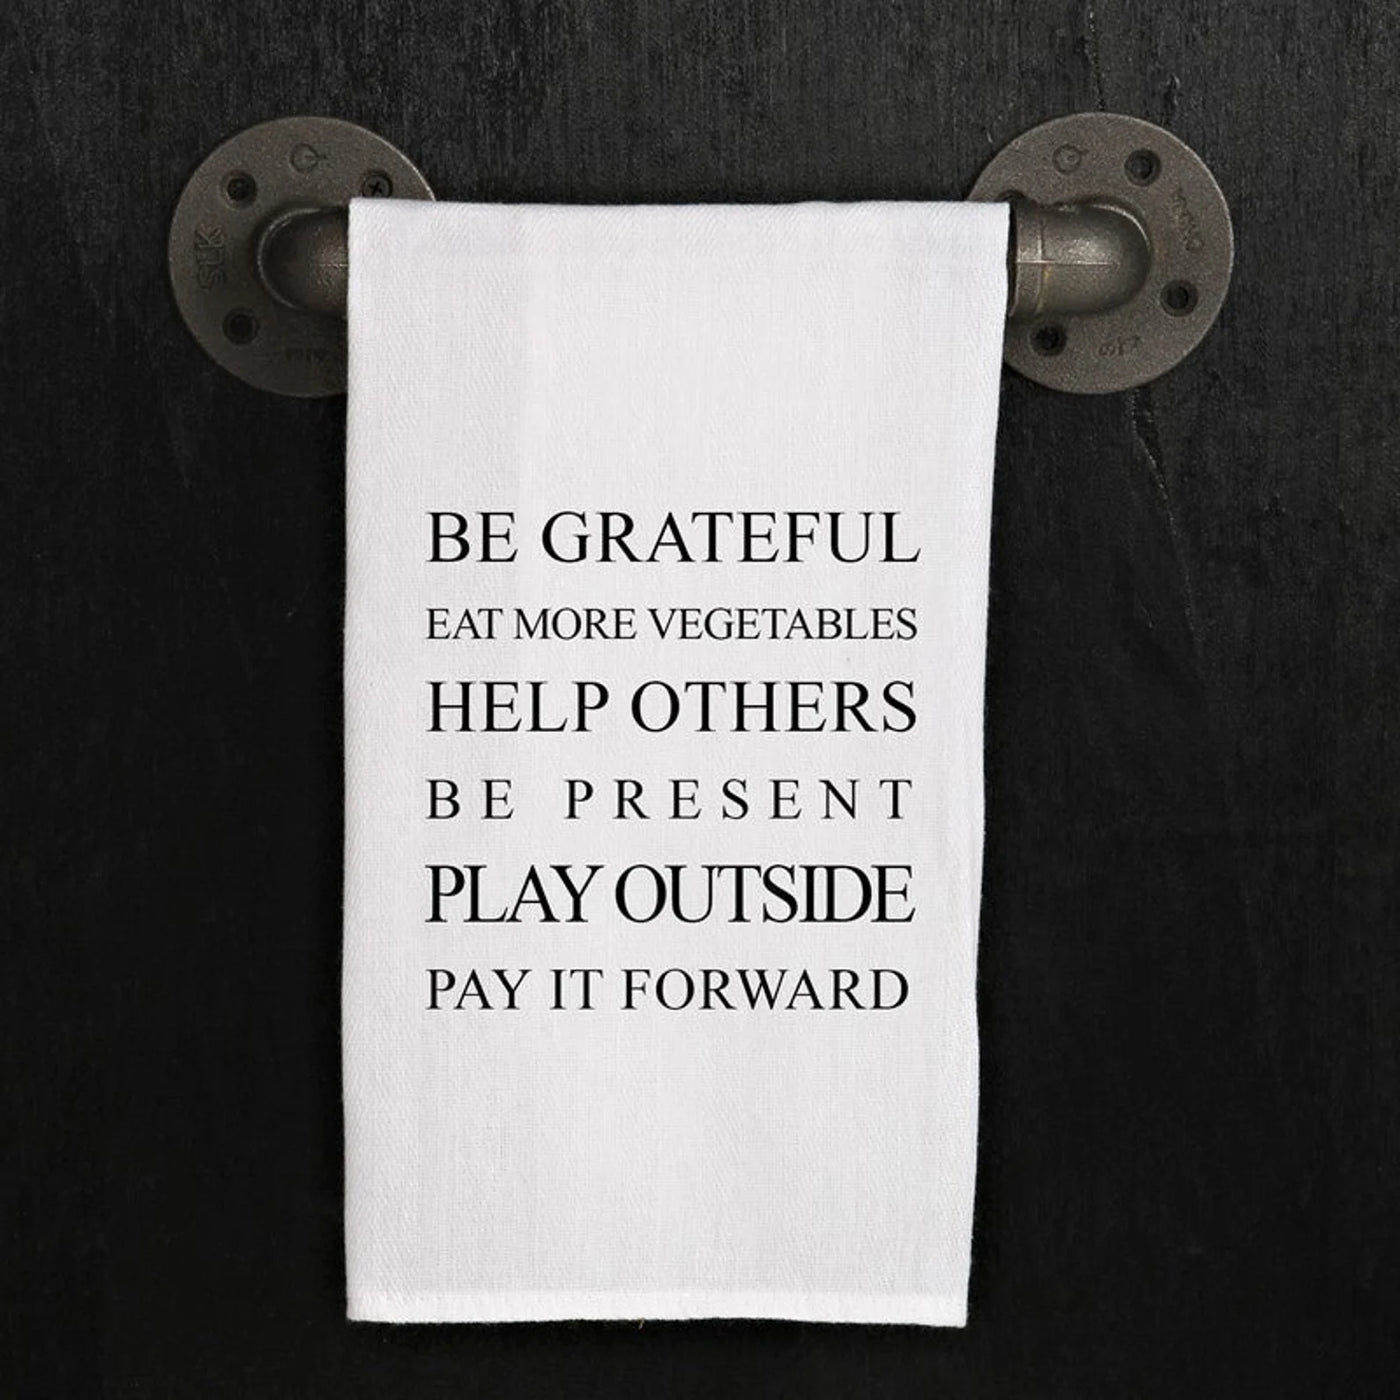 "Be grateful, eat more vegetables, help others, be present, play outside, pay it forward" text written on front of white tea towel.